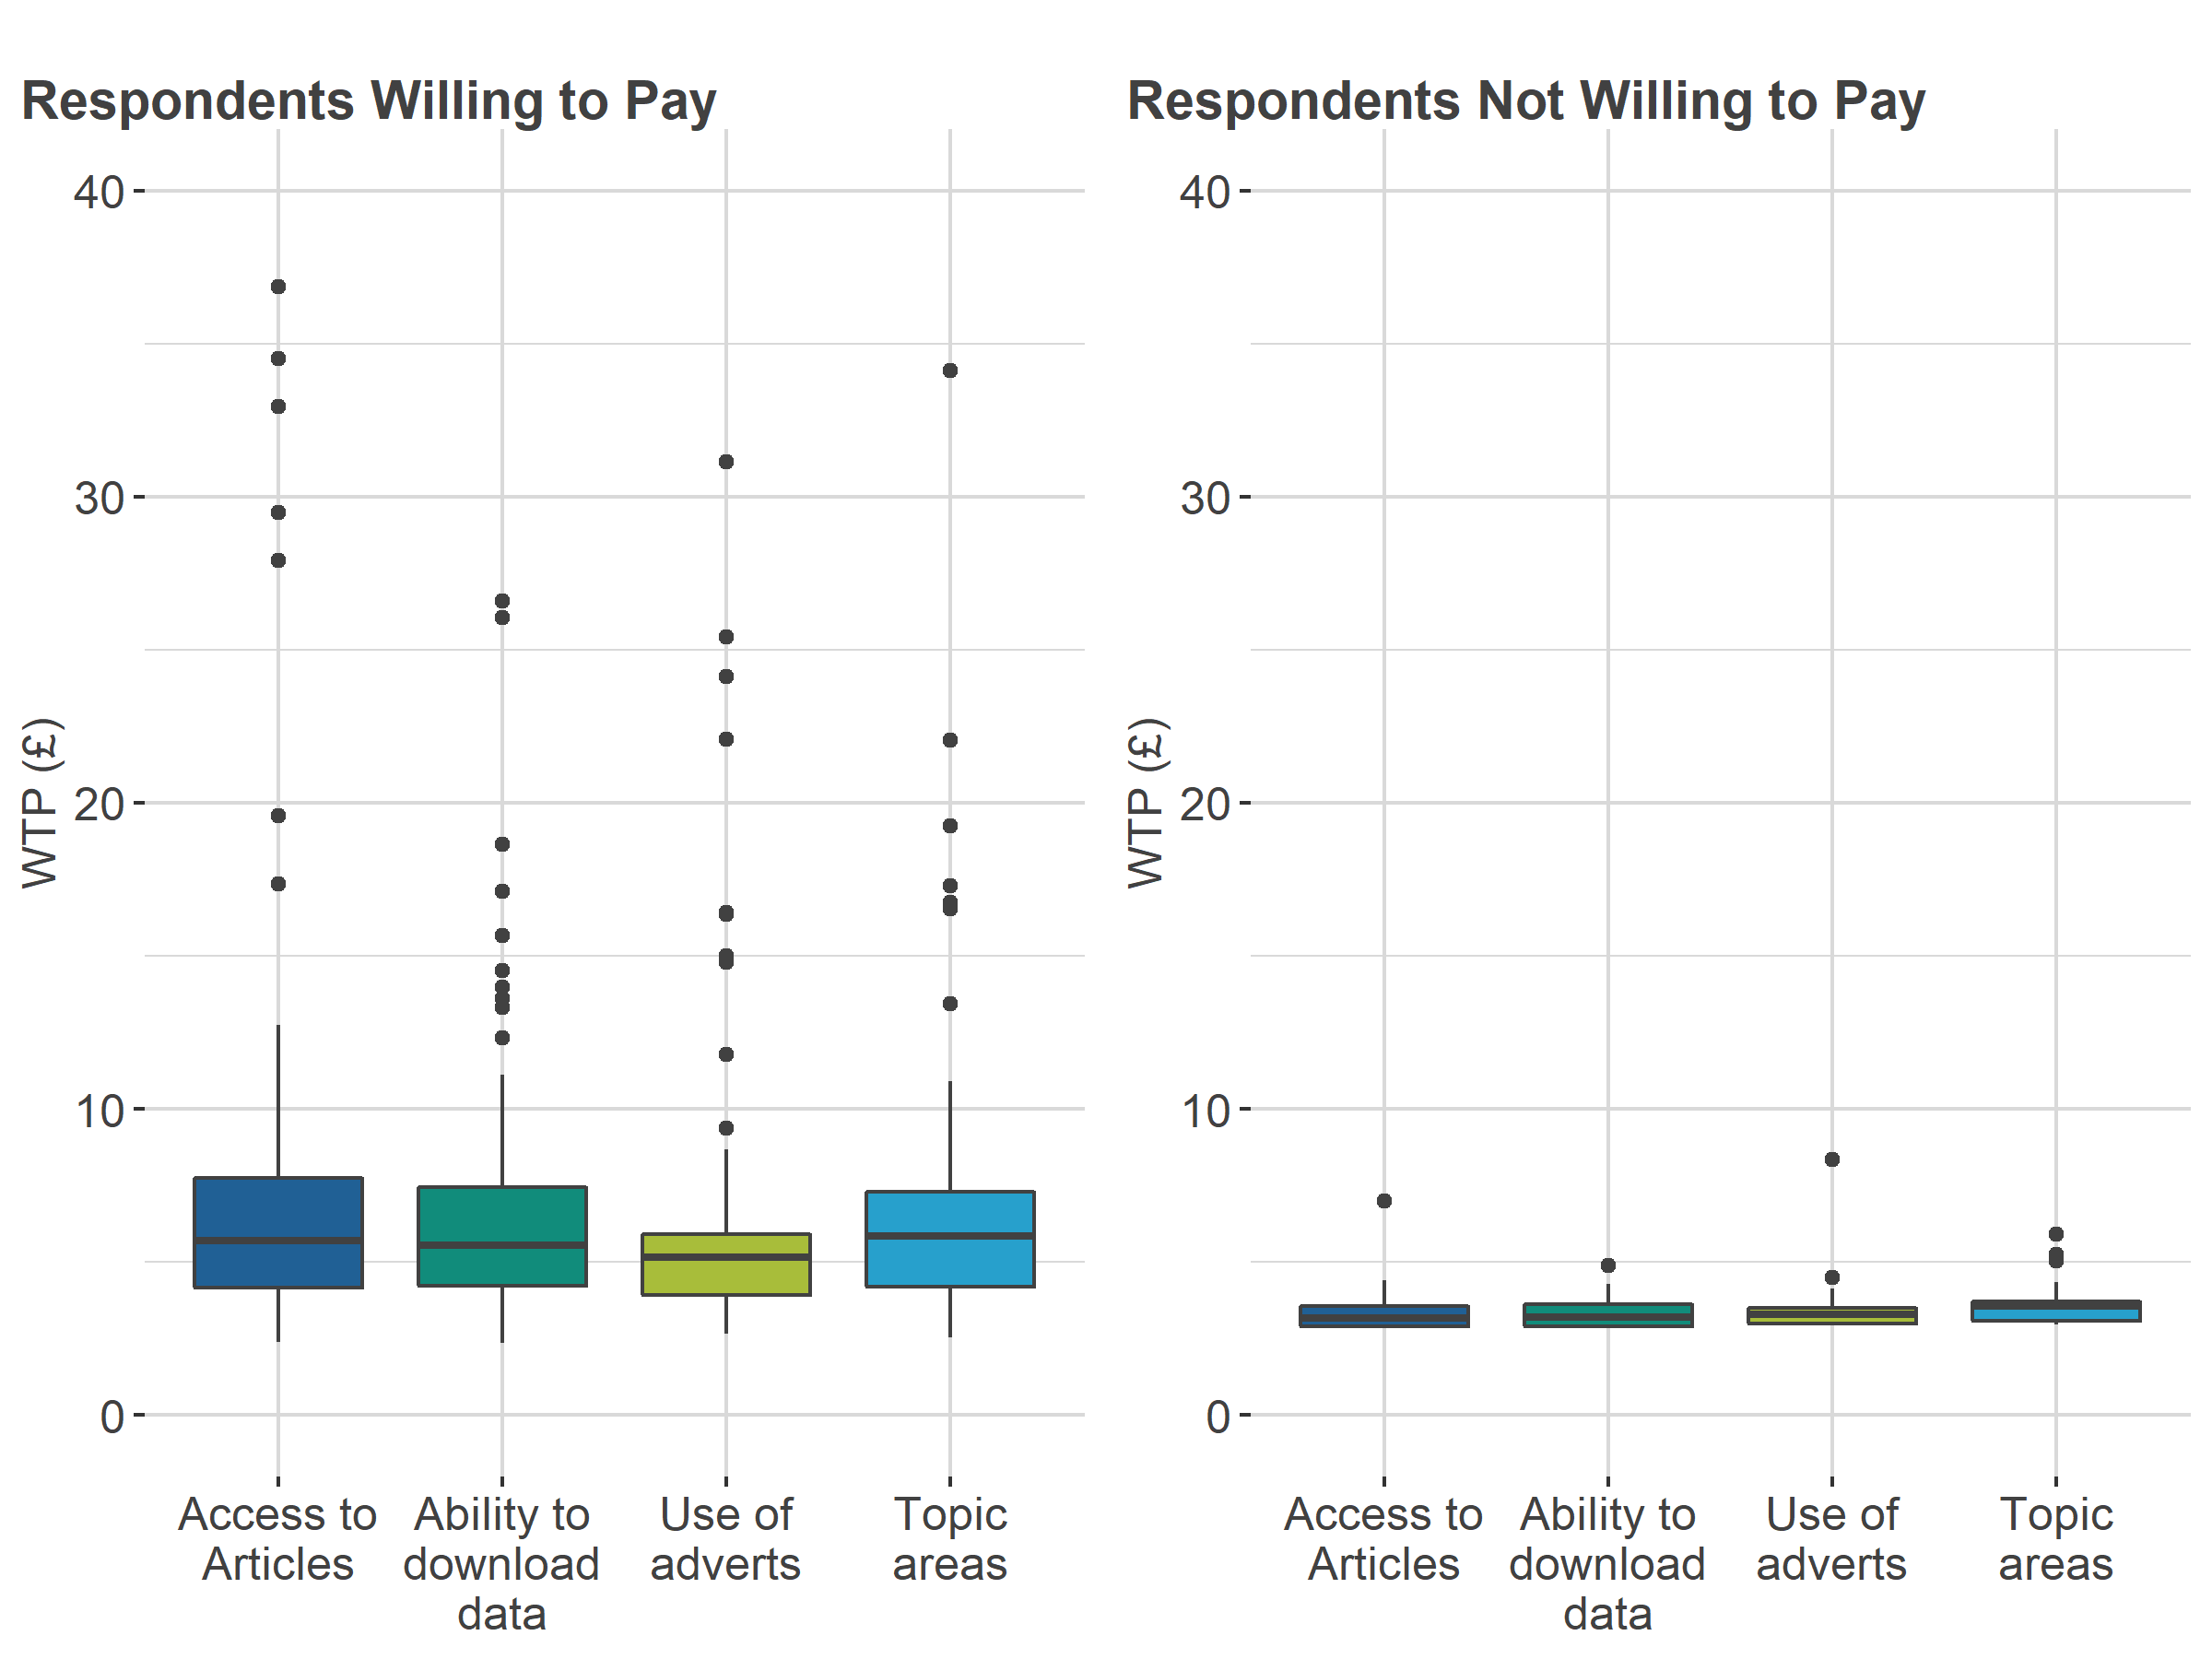 Box plot of expert data users’ willingness to pay in pounds in Conjoint B.